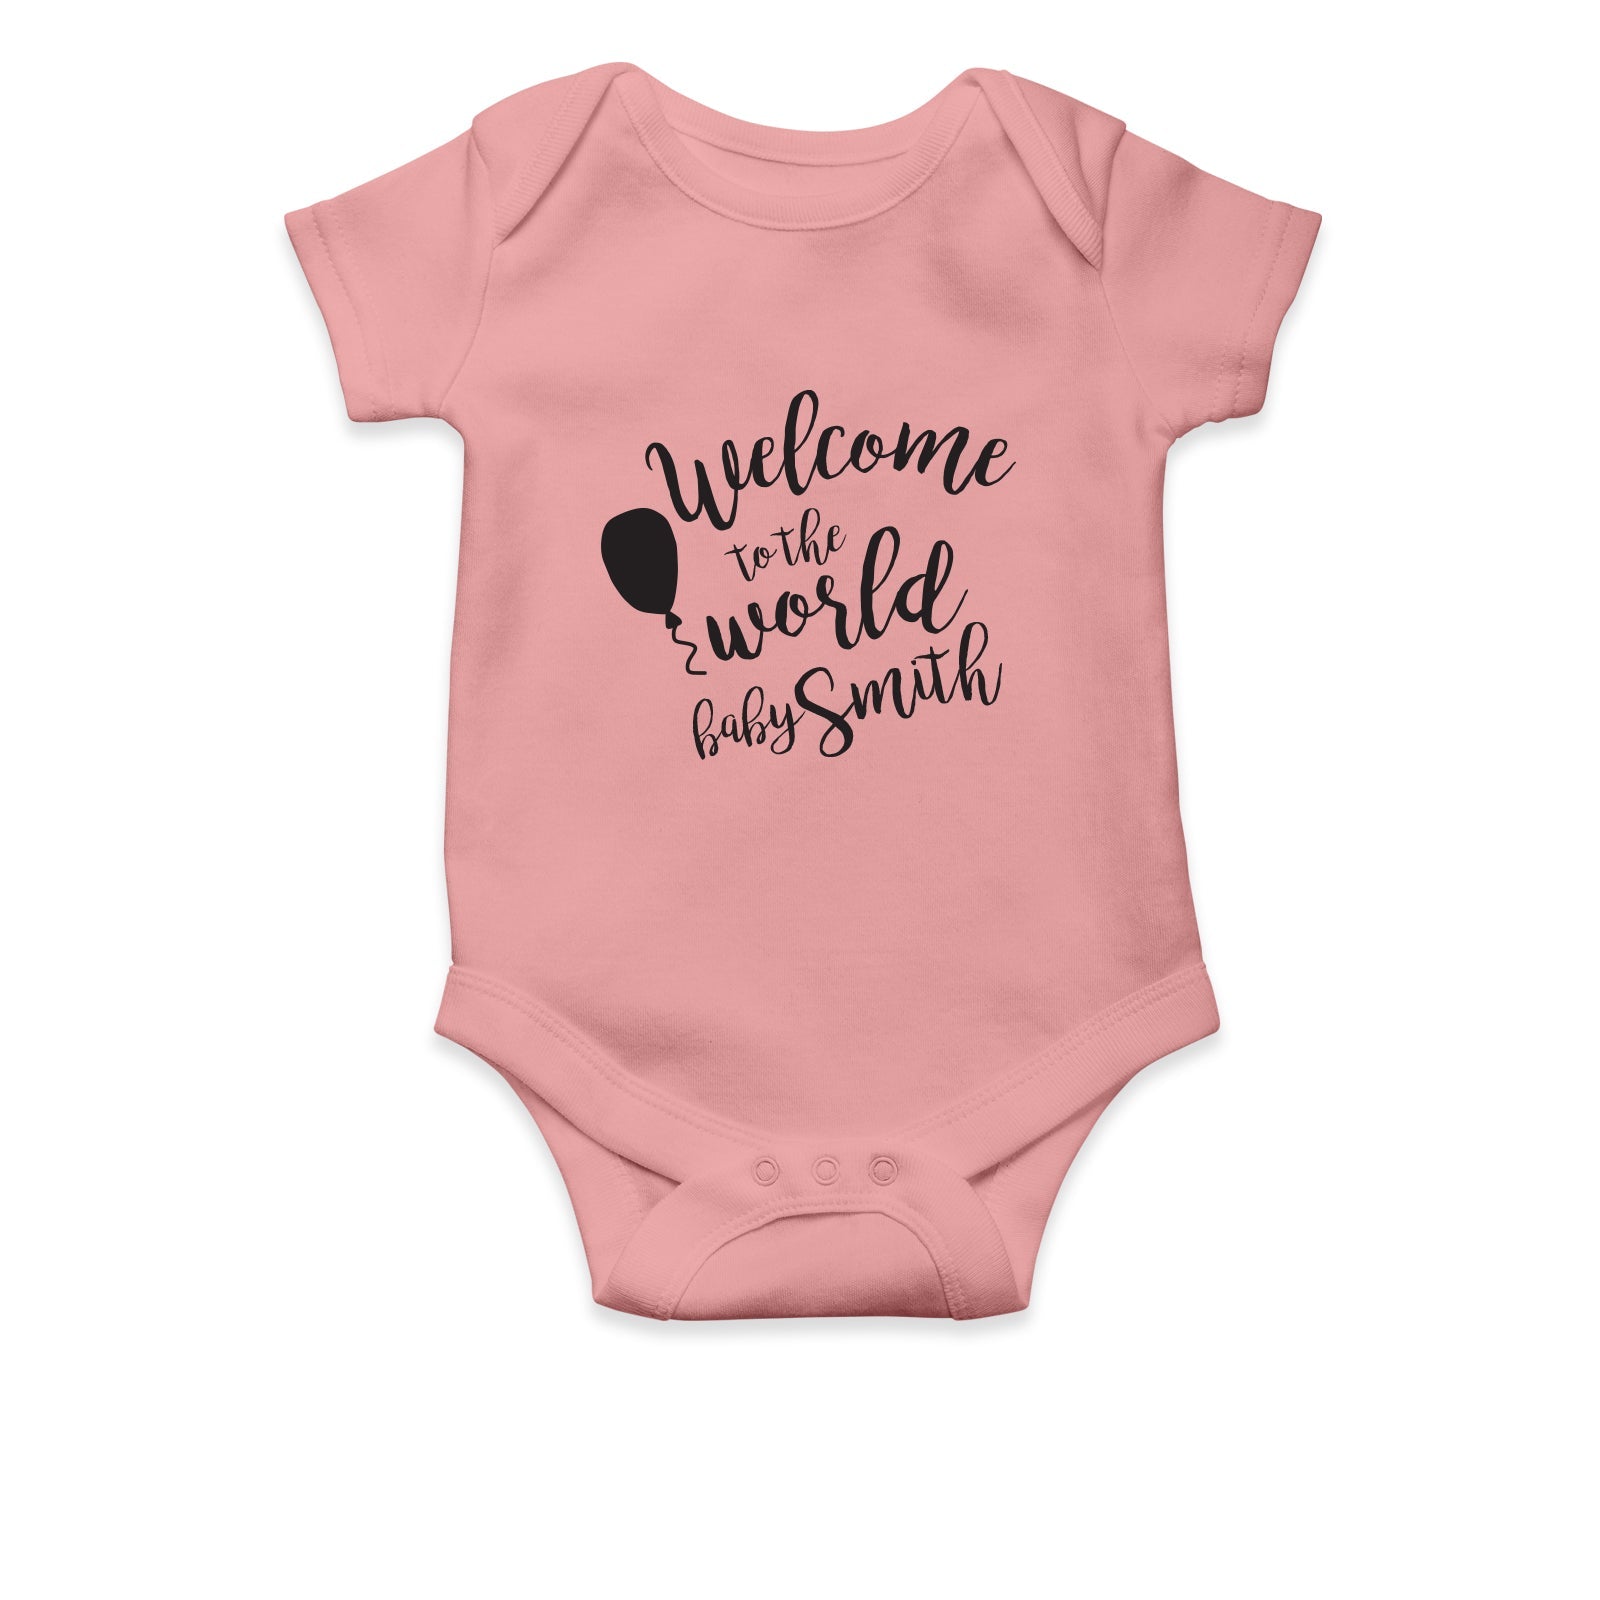 Personalised White Baby Body Suit Grow Vest - Welcome Little one!